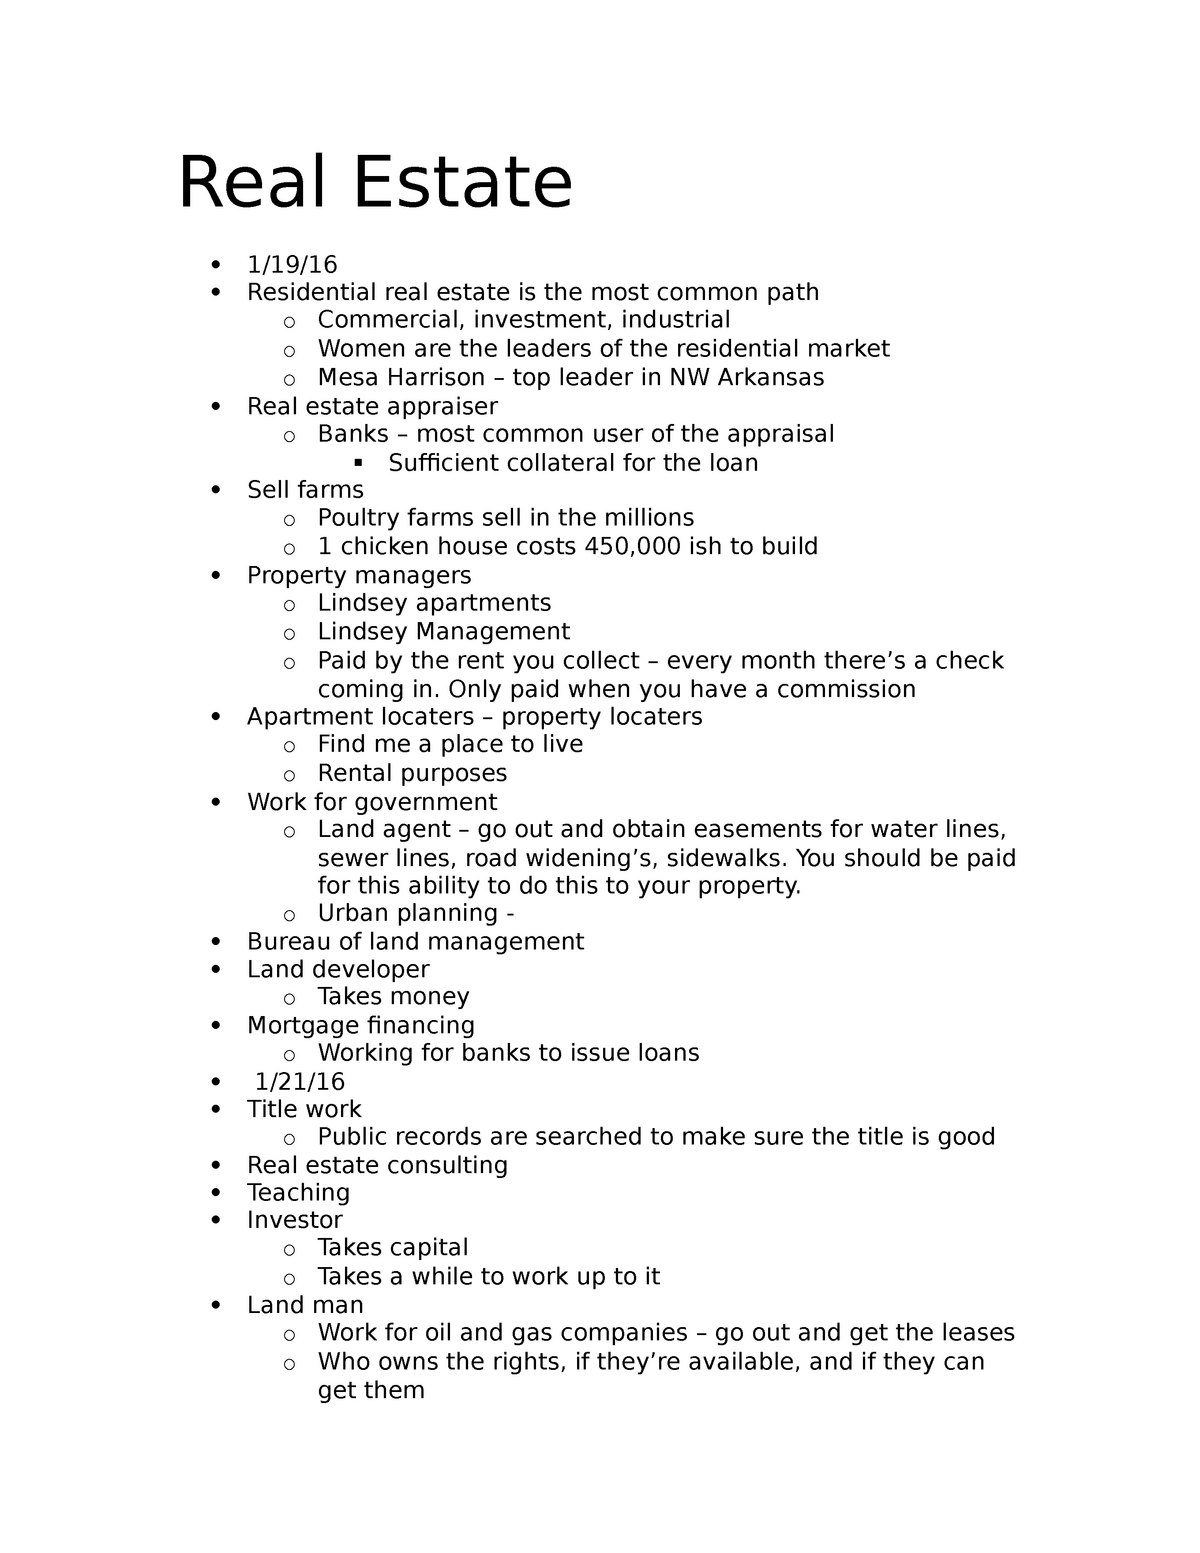 essay writing topics on real estate